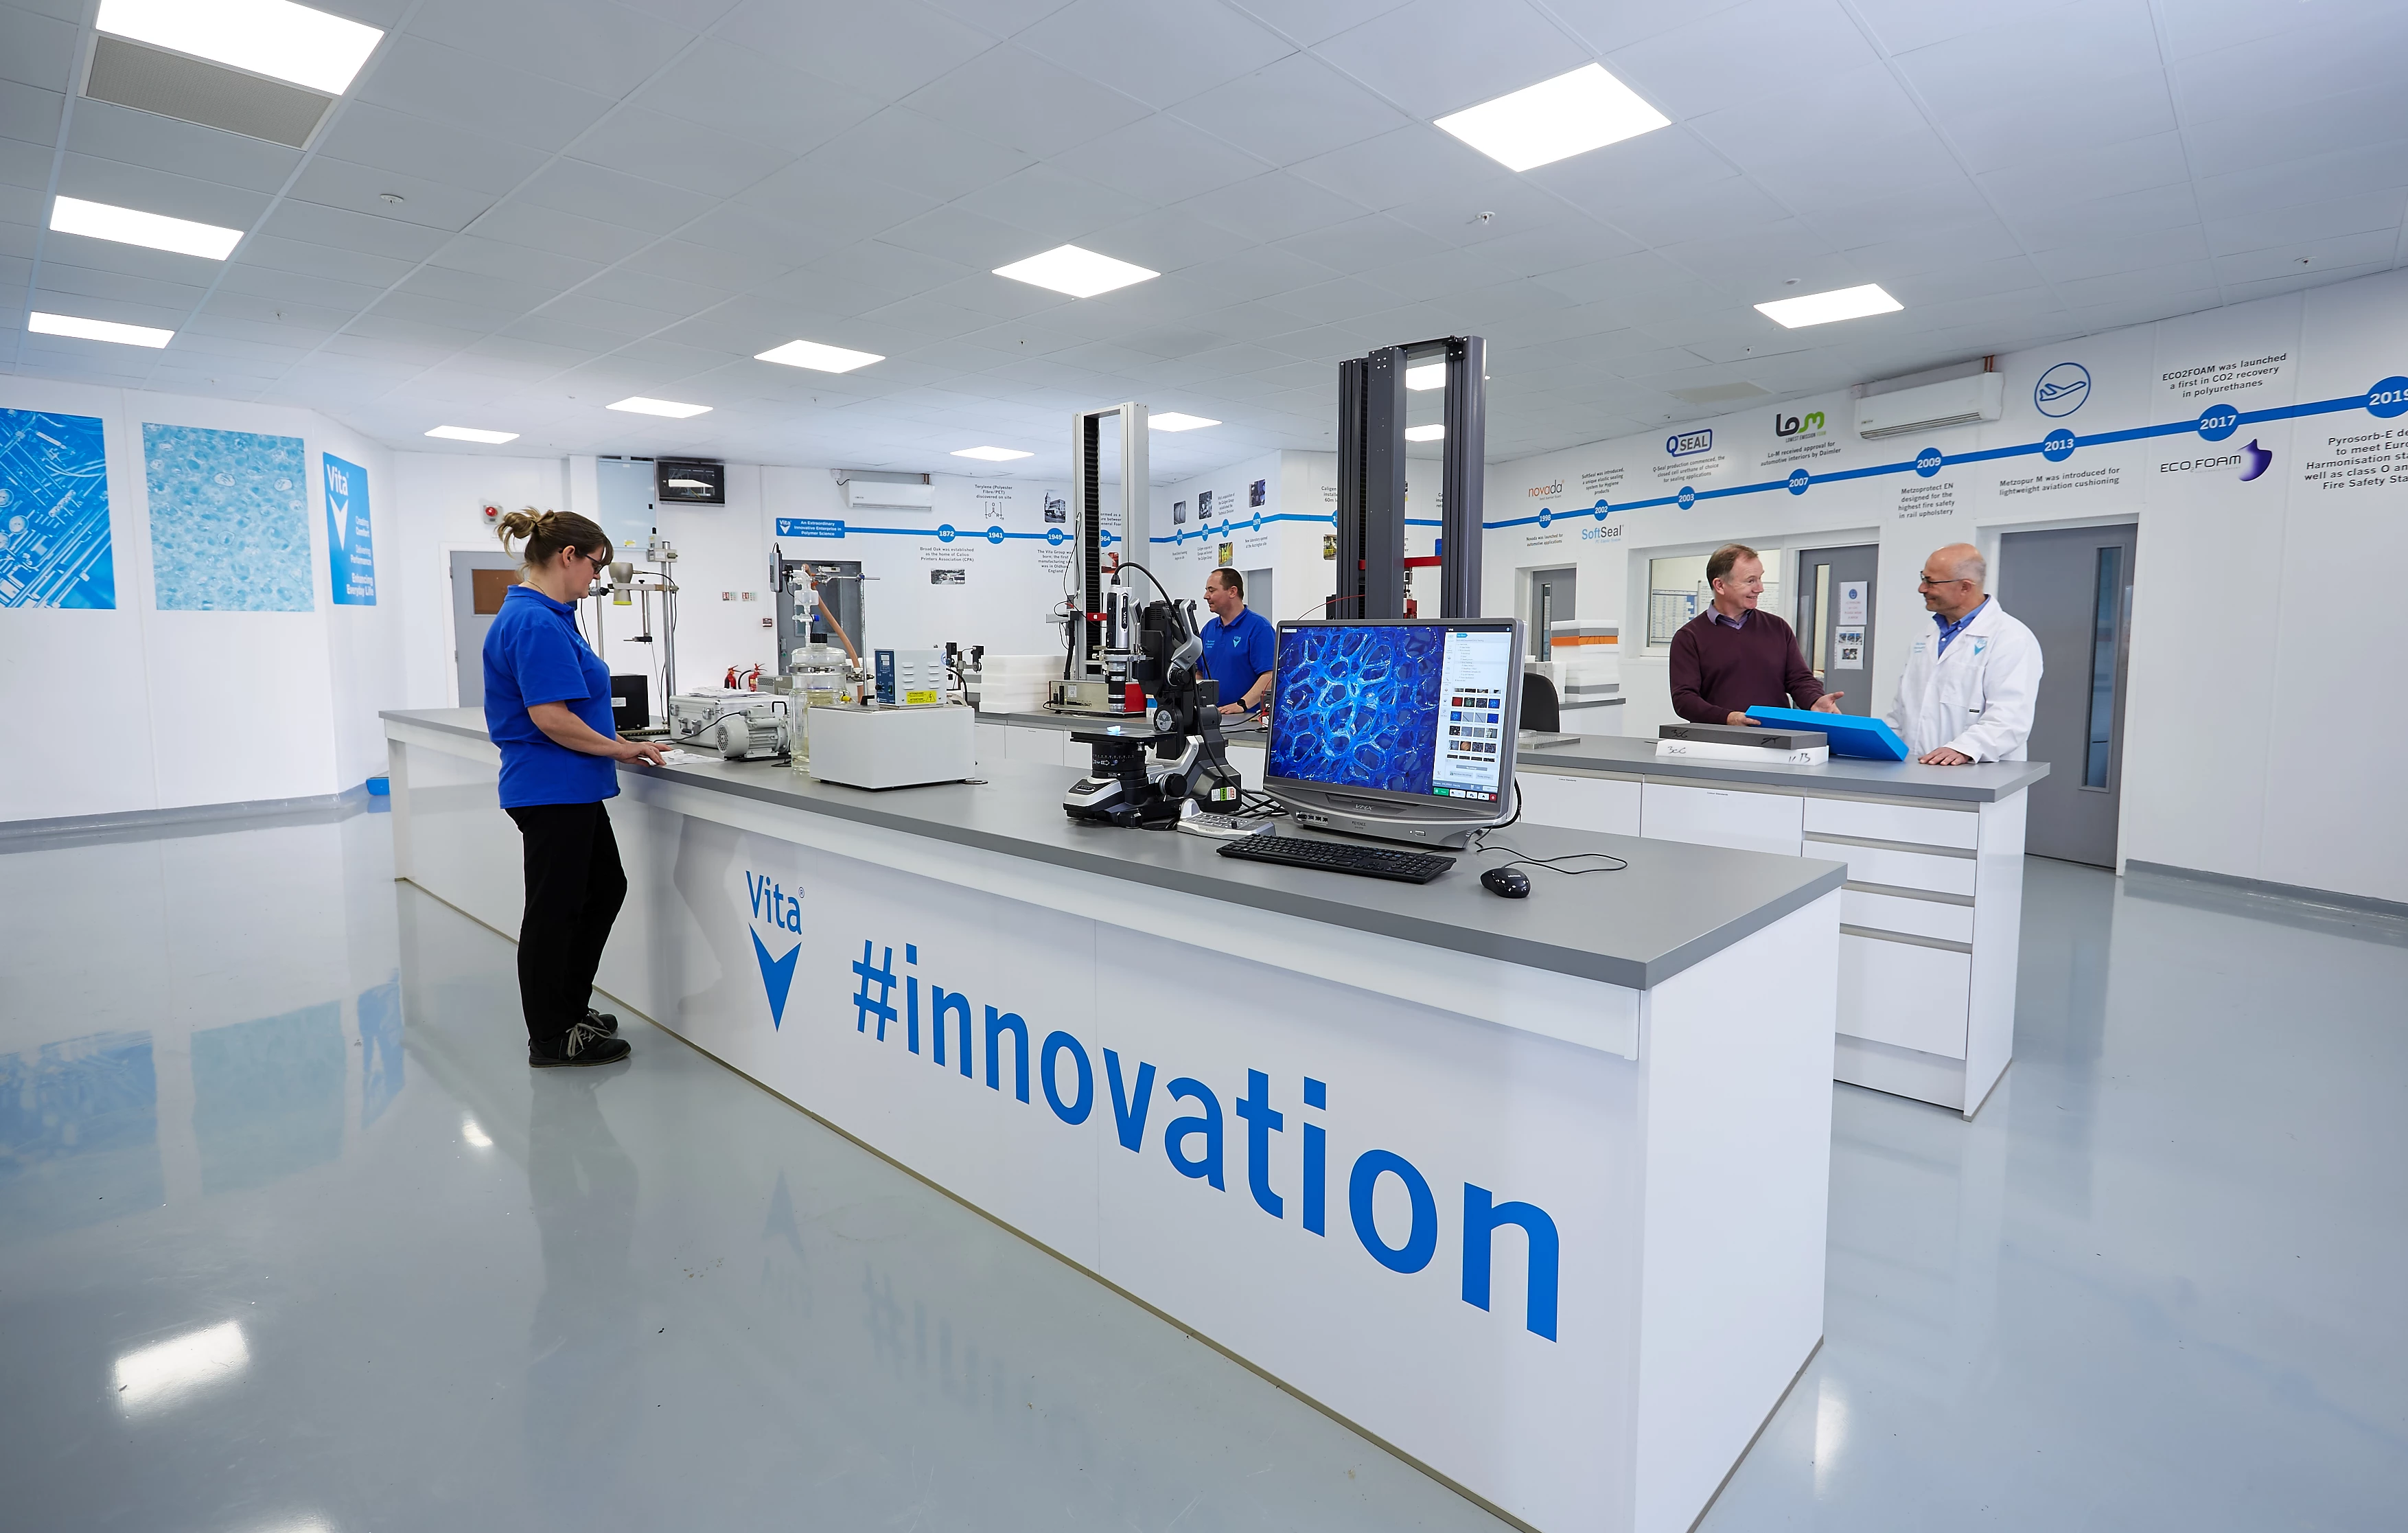 Vita's Accrington Innovation Centre has been at the forefront of sustinable foam R&D